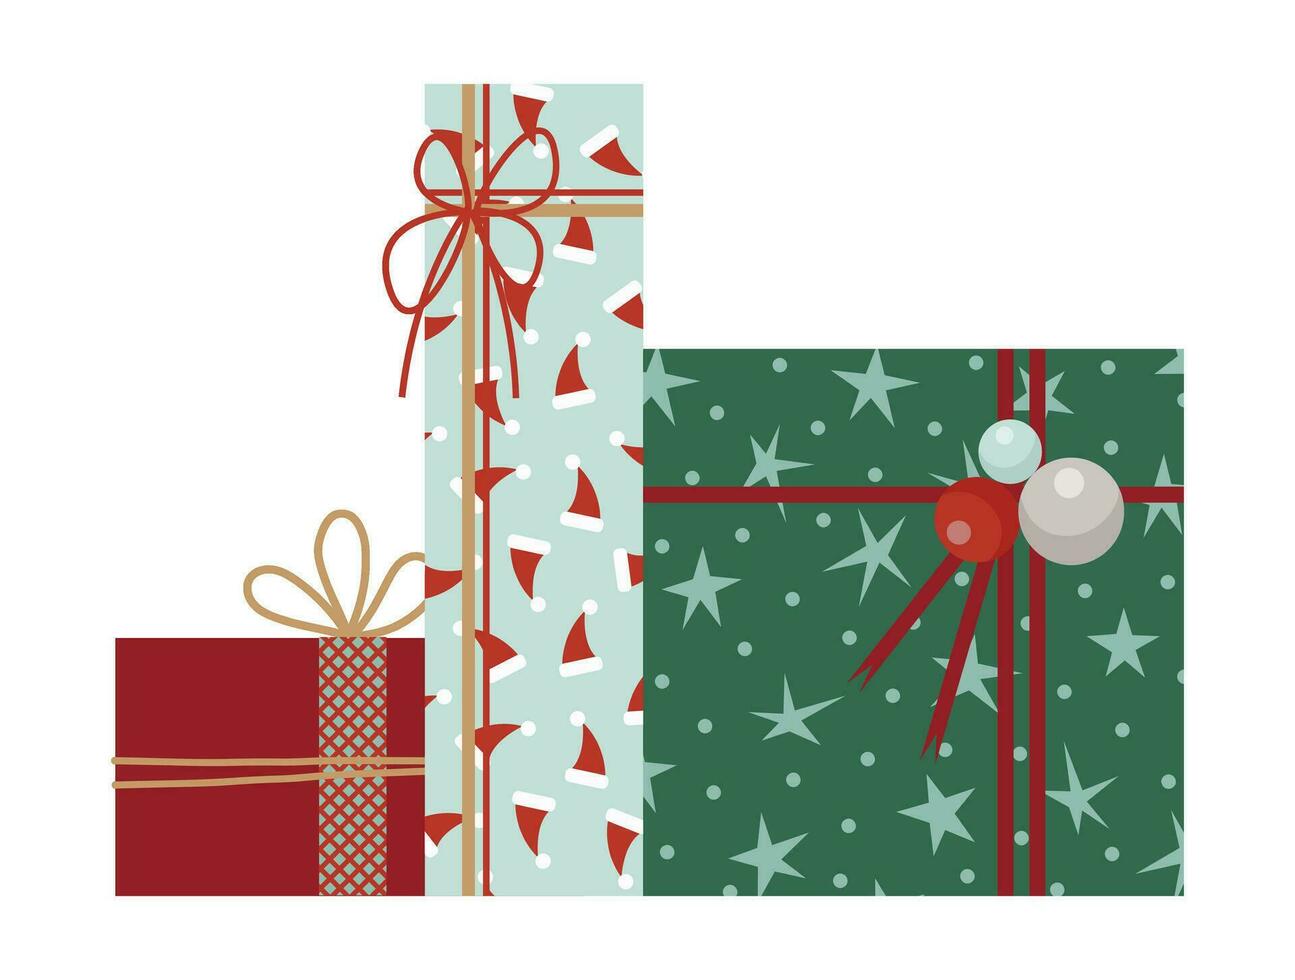 Wrapped Christmas gift boxes. New Year present boxes with ribbons, bows, green and red wrapping papers. For greeting cards, banners, web illustrations, icons, or logos. Vector illustration EPS 10